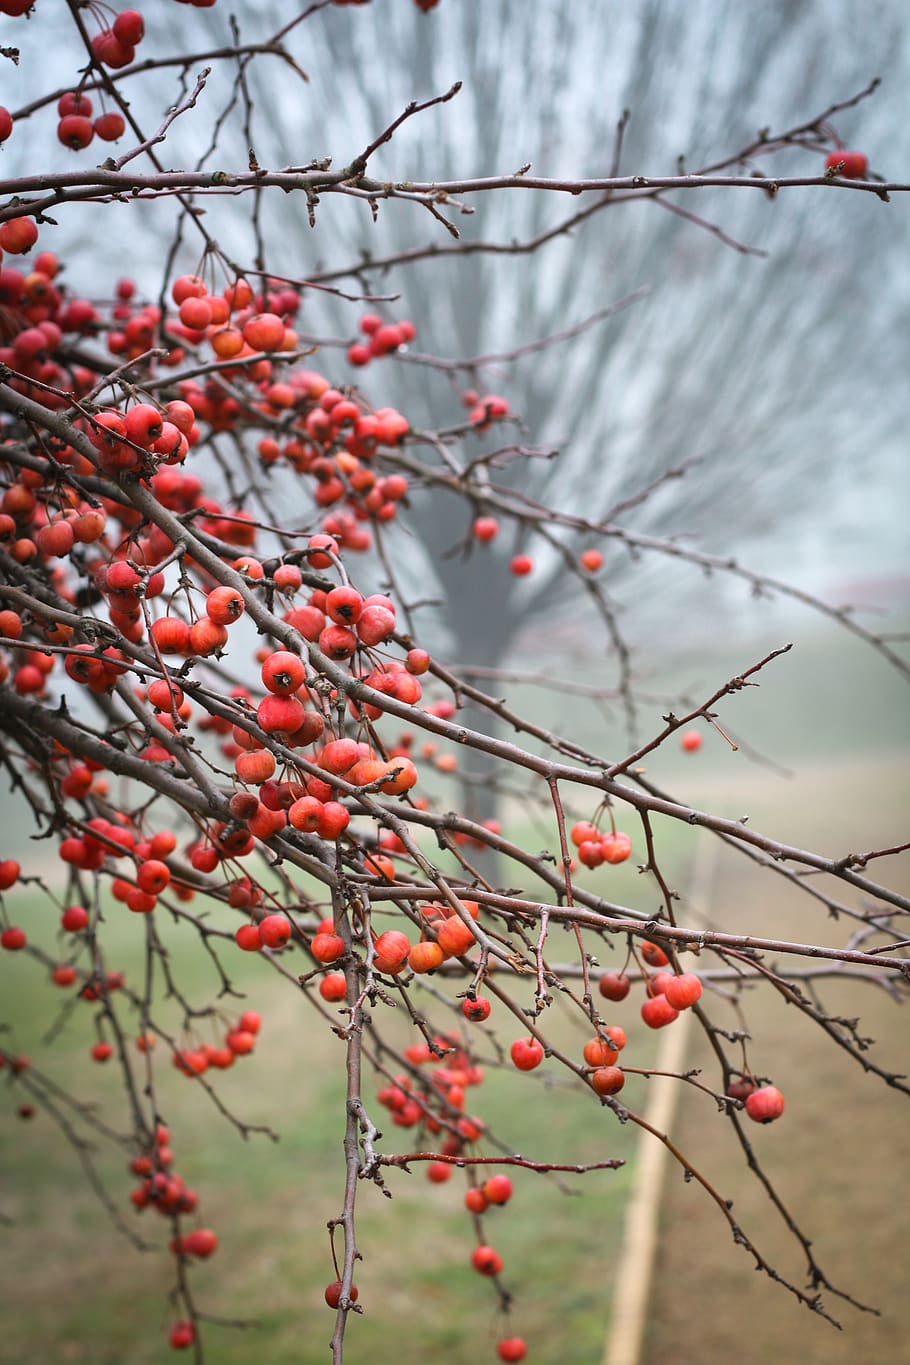 golden apple, winter, berry, red, fruit, healthy eating, food and drink, food, tree, plant